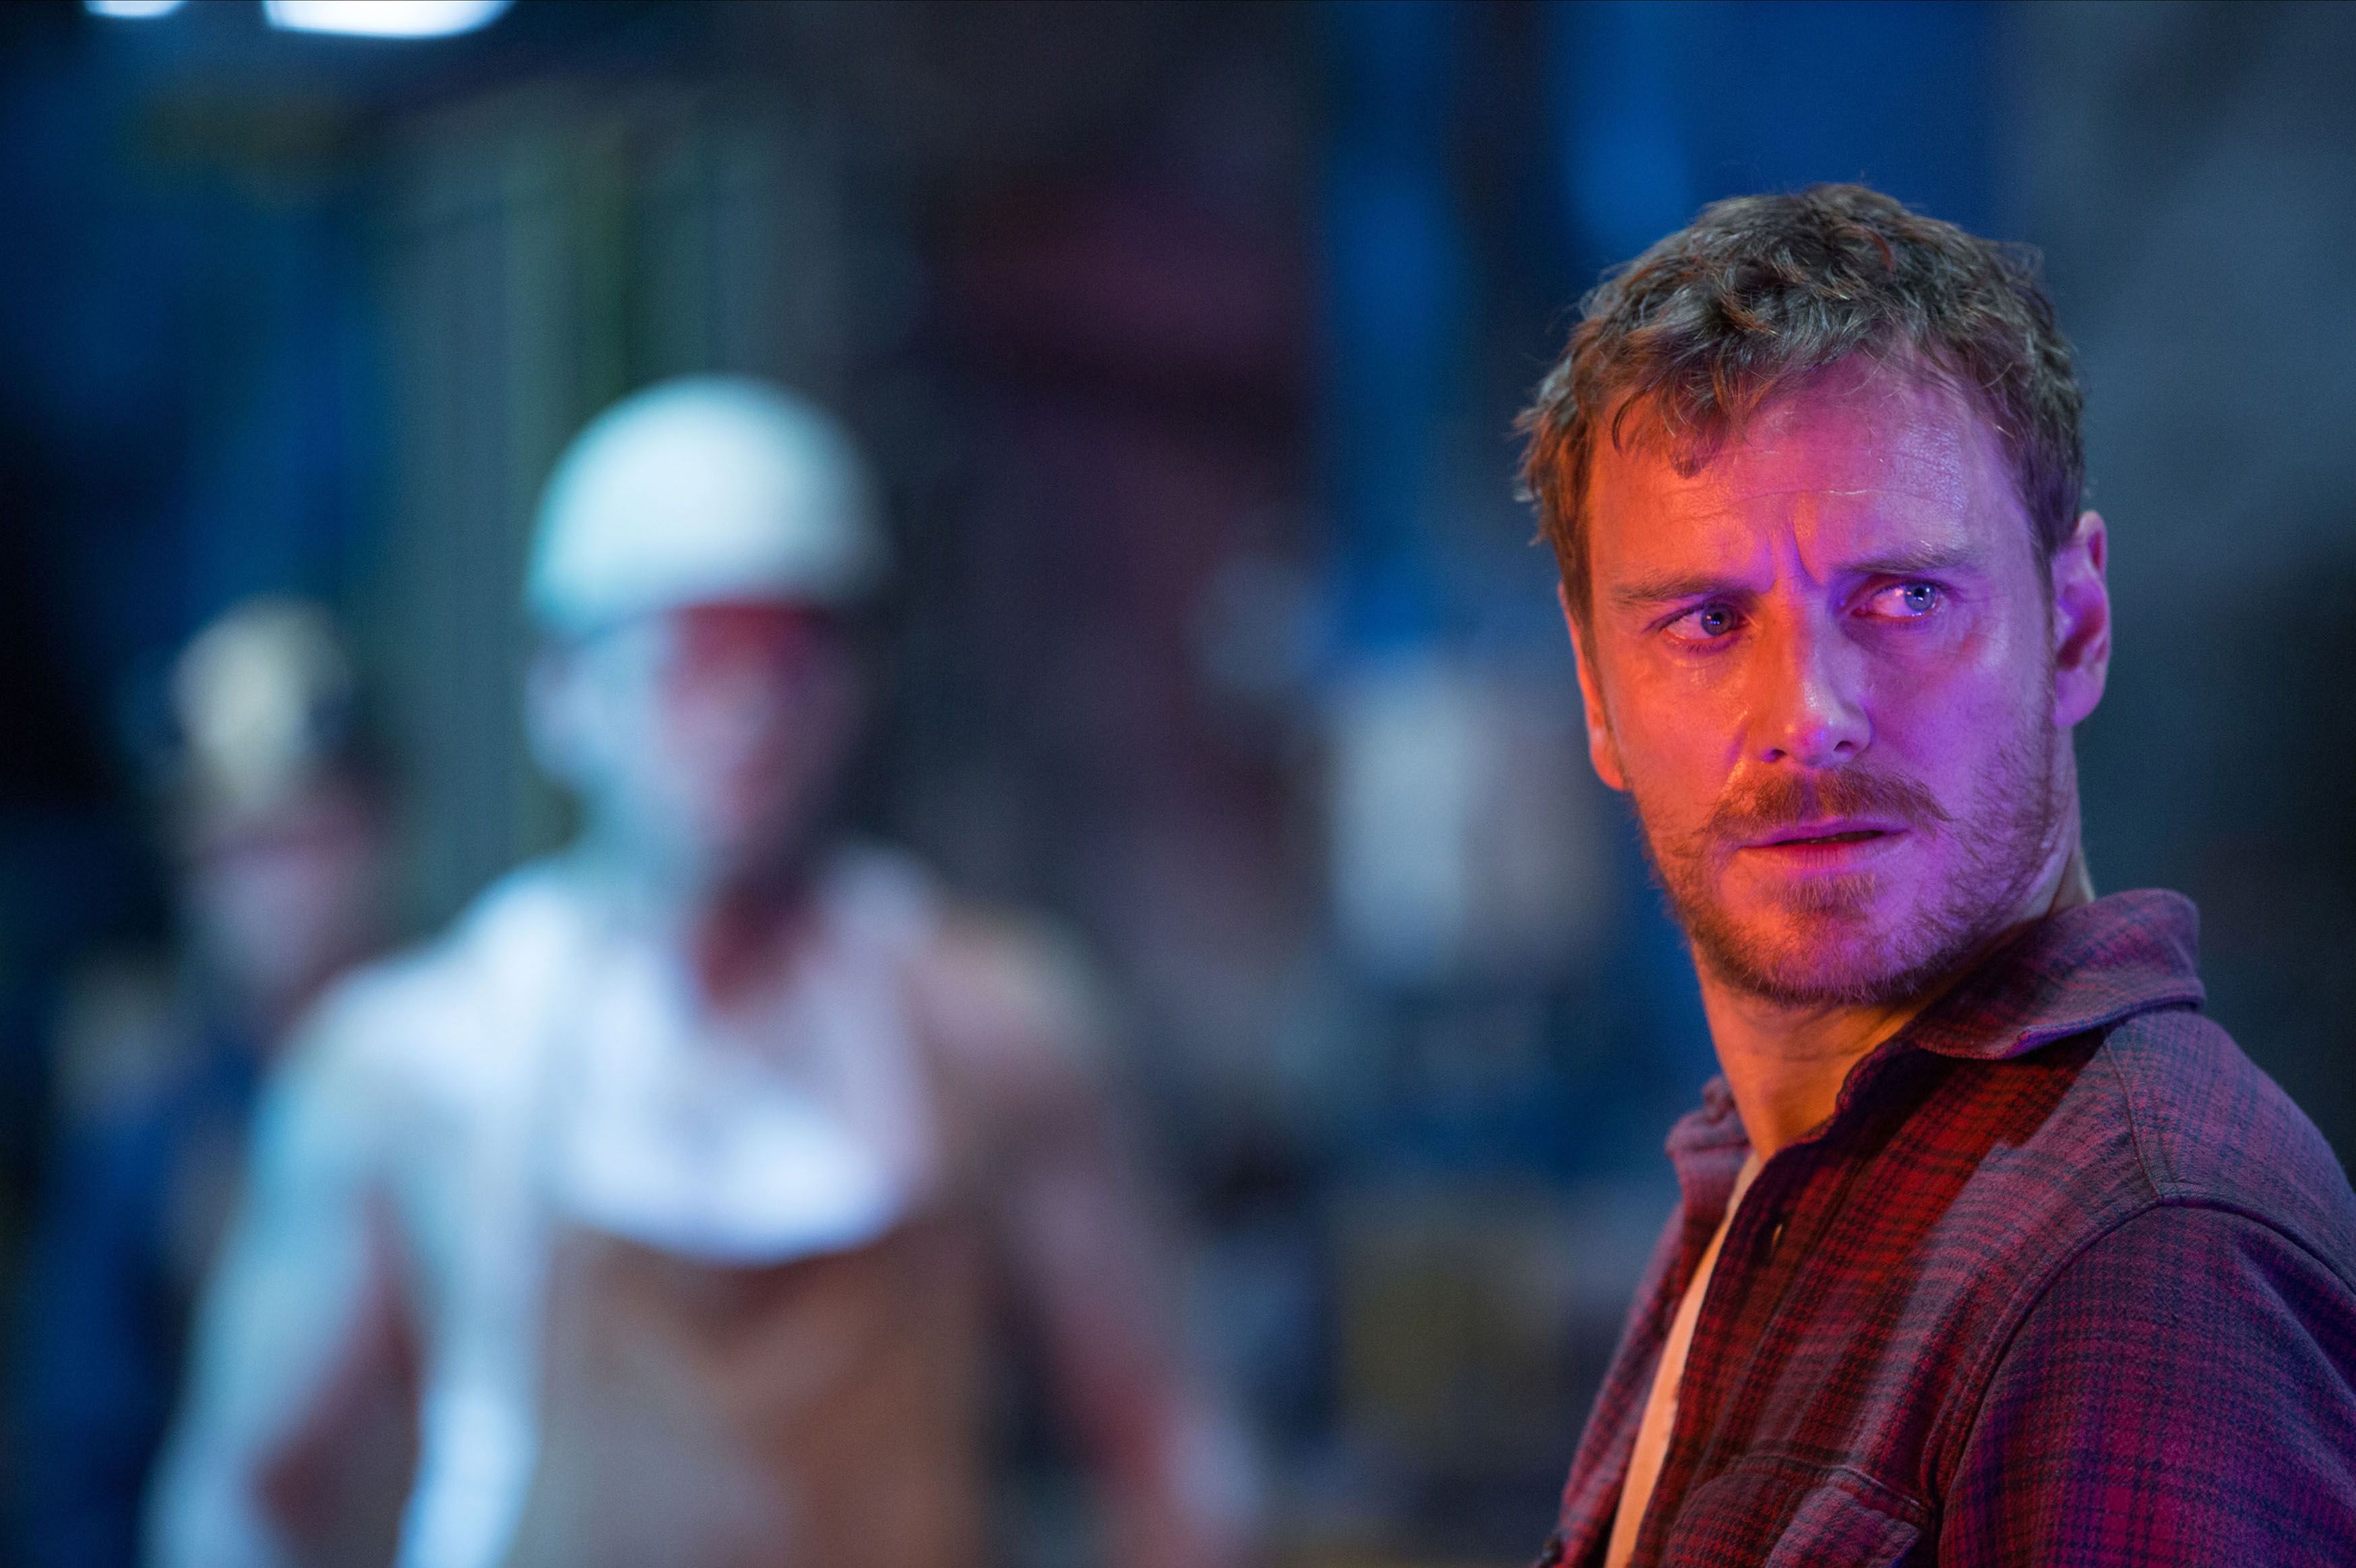 Michael Fassbender: 300 - Everything you wanted to know about the Spartans